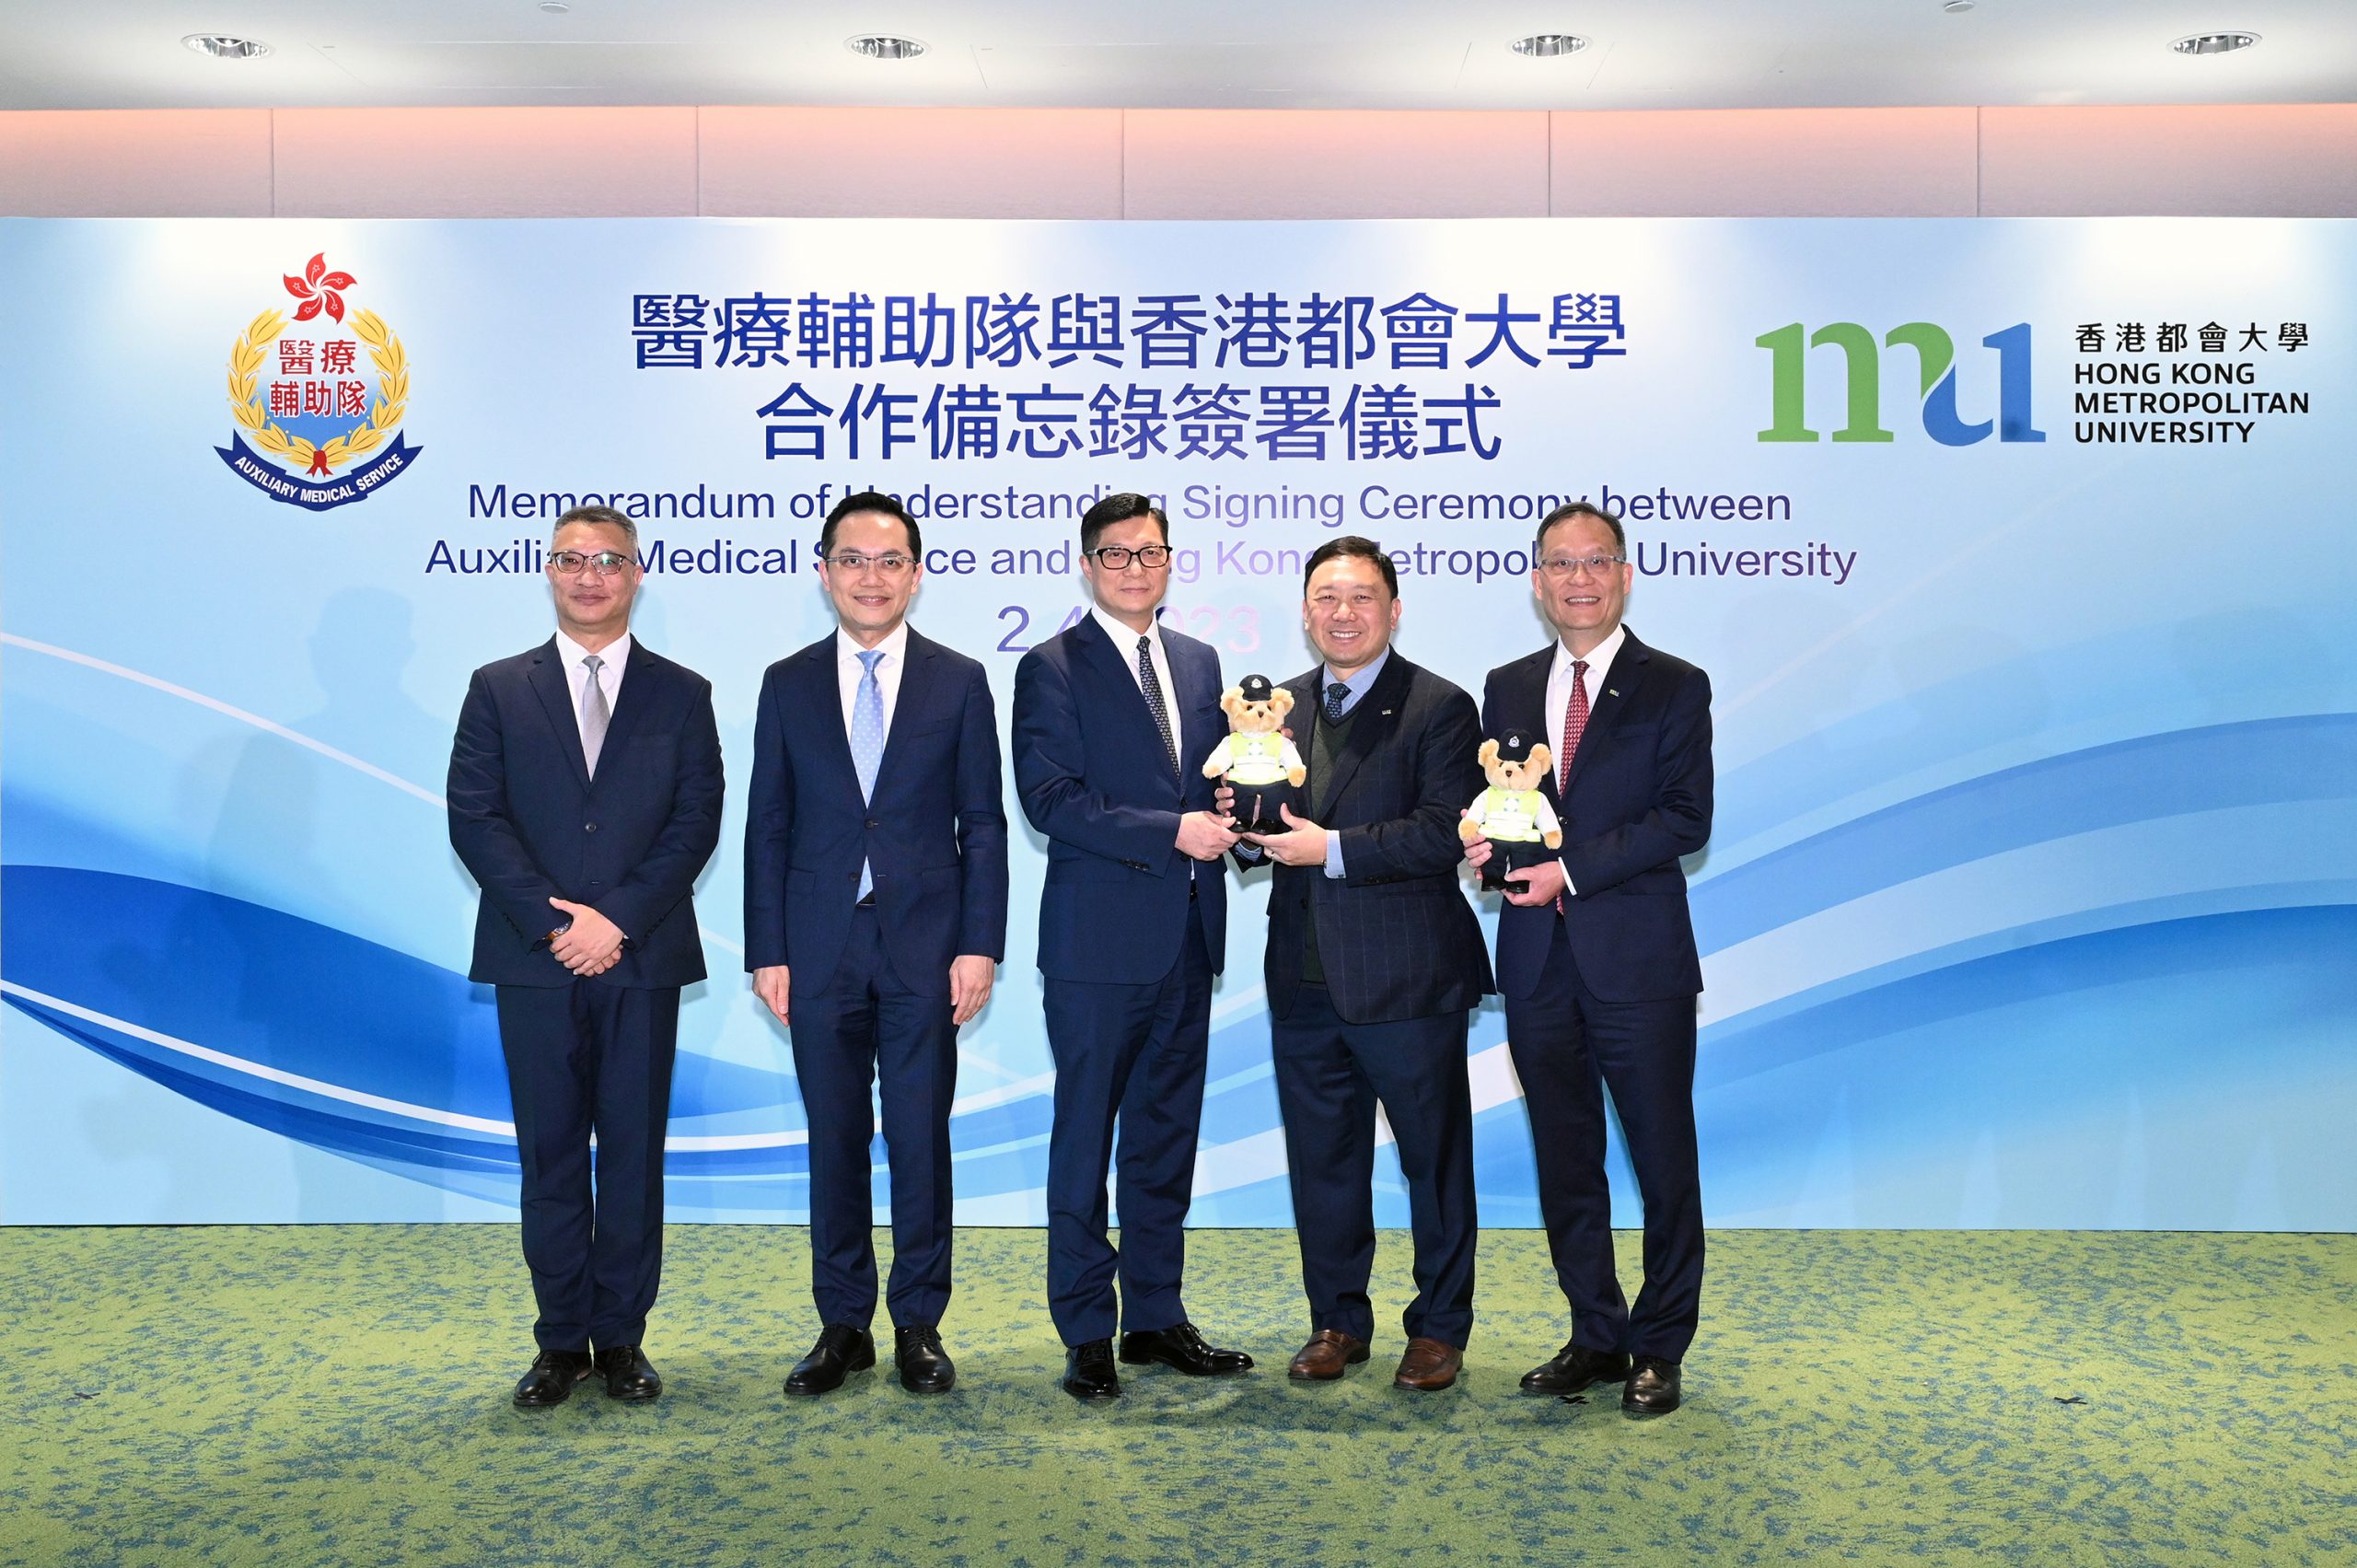 Exchange of souvenirs. (From left) AMS Chief Staff Officer Mr Wong Ying-keung, Director of Health and AMS Commissioner Dr Ronald Lam Man-kin, Secretary for Security of the HKSAR Government Mr Tang Ping-keung, HKMU Council Chairman Ir Dr Conrad Wong Tin-cheung, and HKMU President Prof. Paul Lam Kwan-sing.